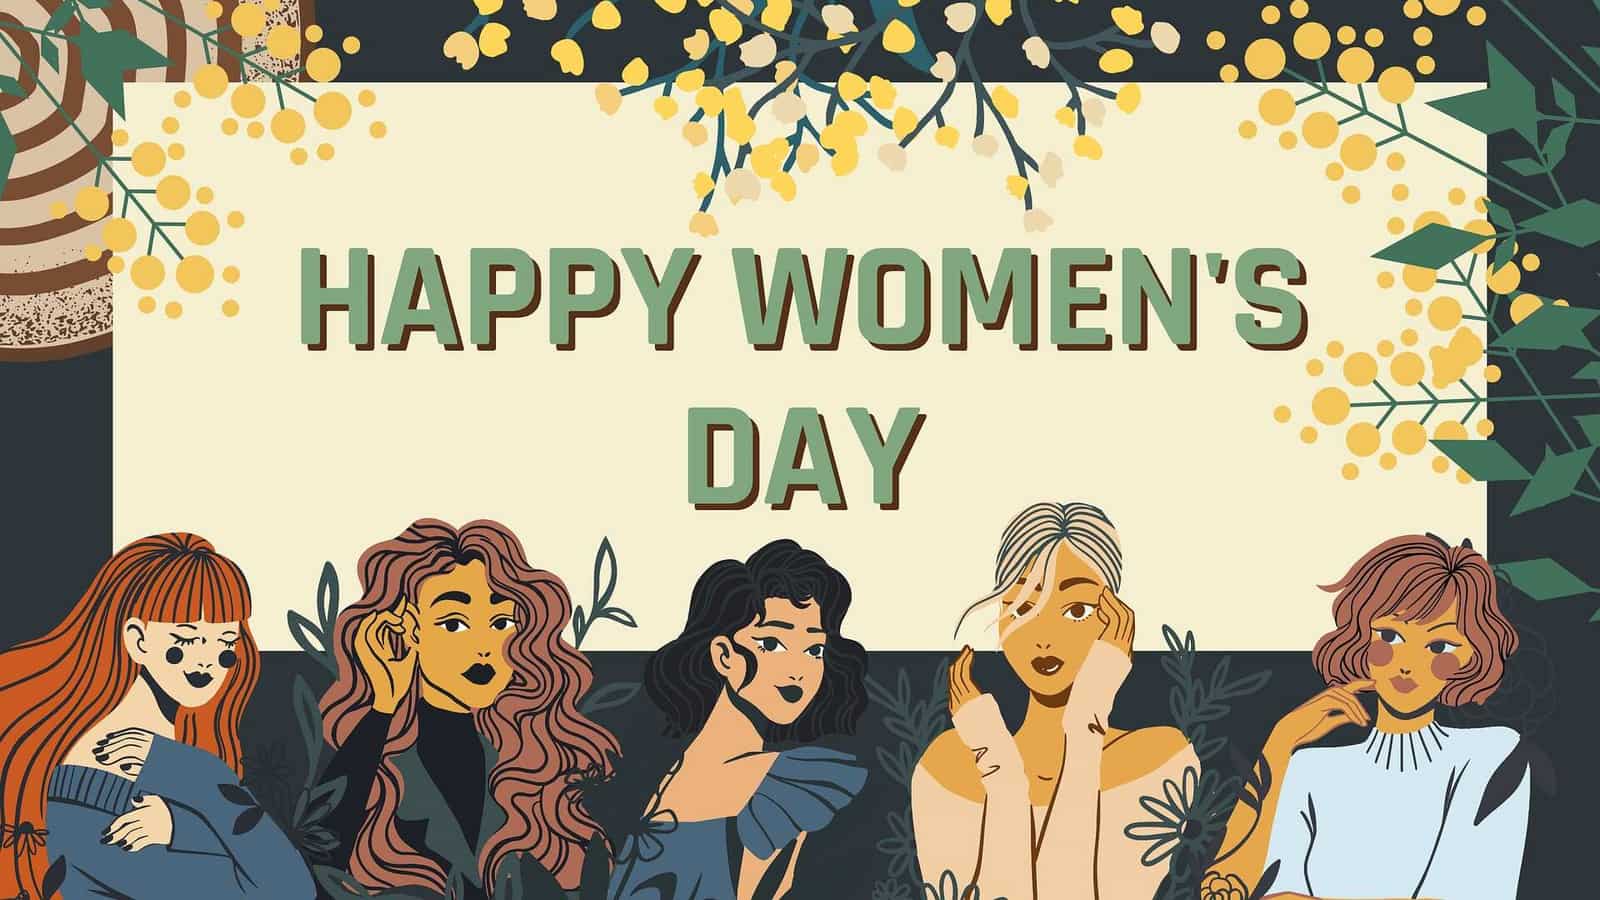 International Women's Day 2023: When is Women's Day? Date, history, significance, celebration, theme, all you need to know